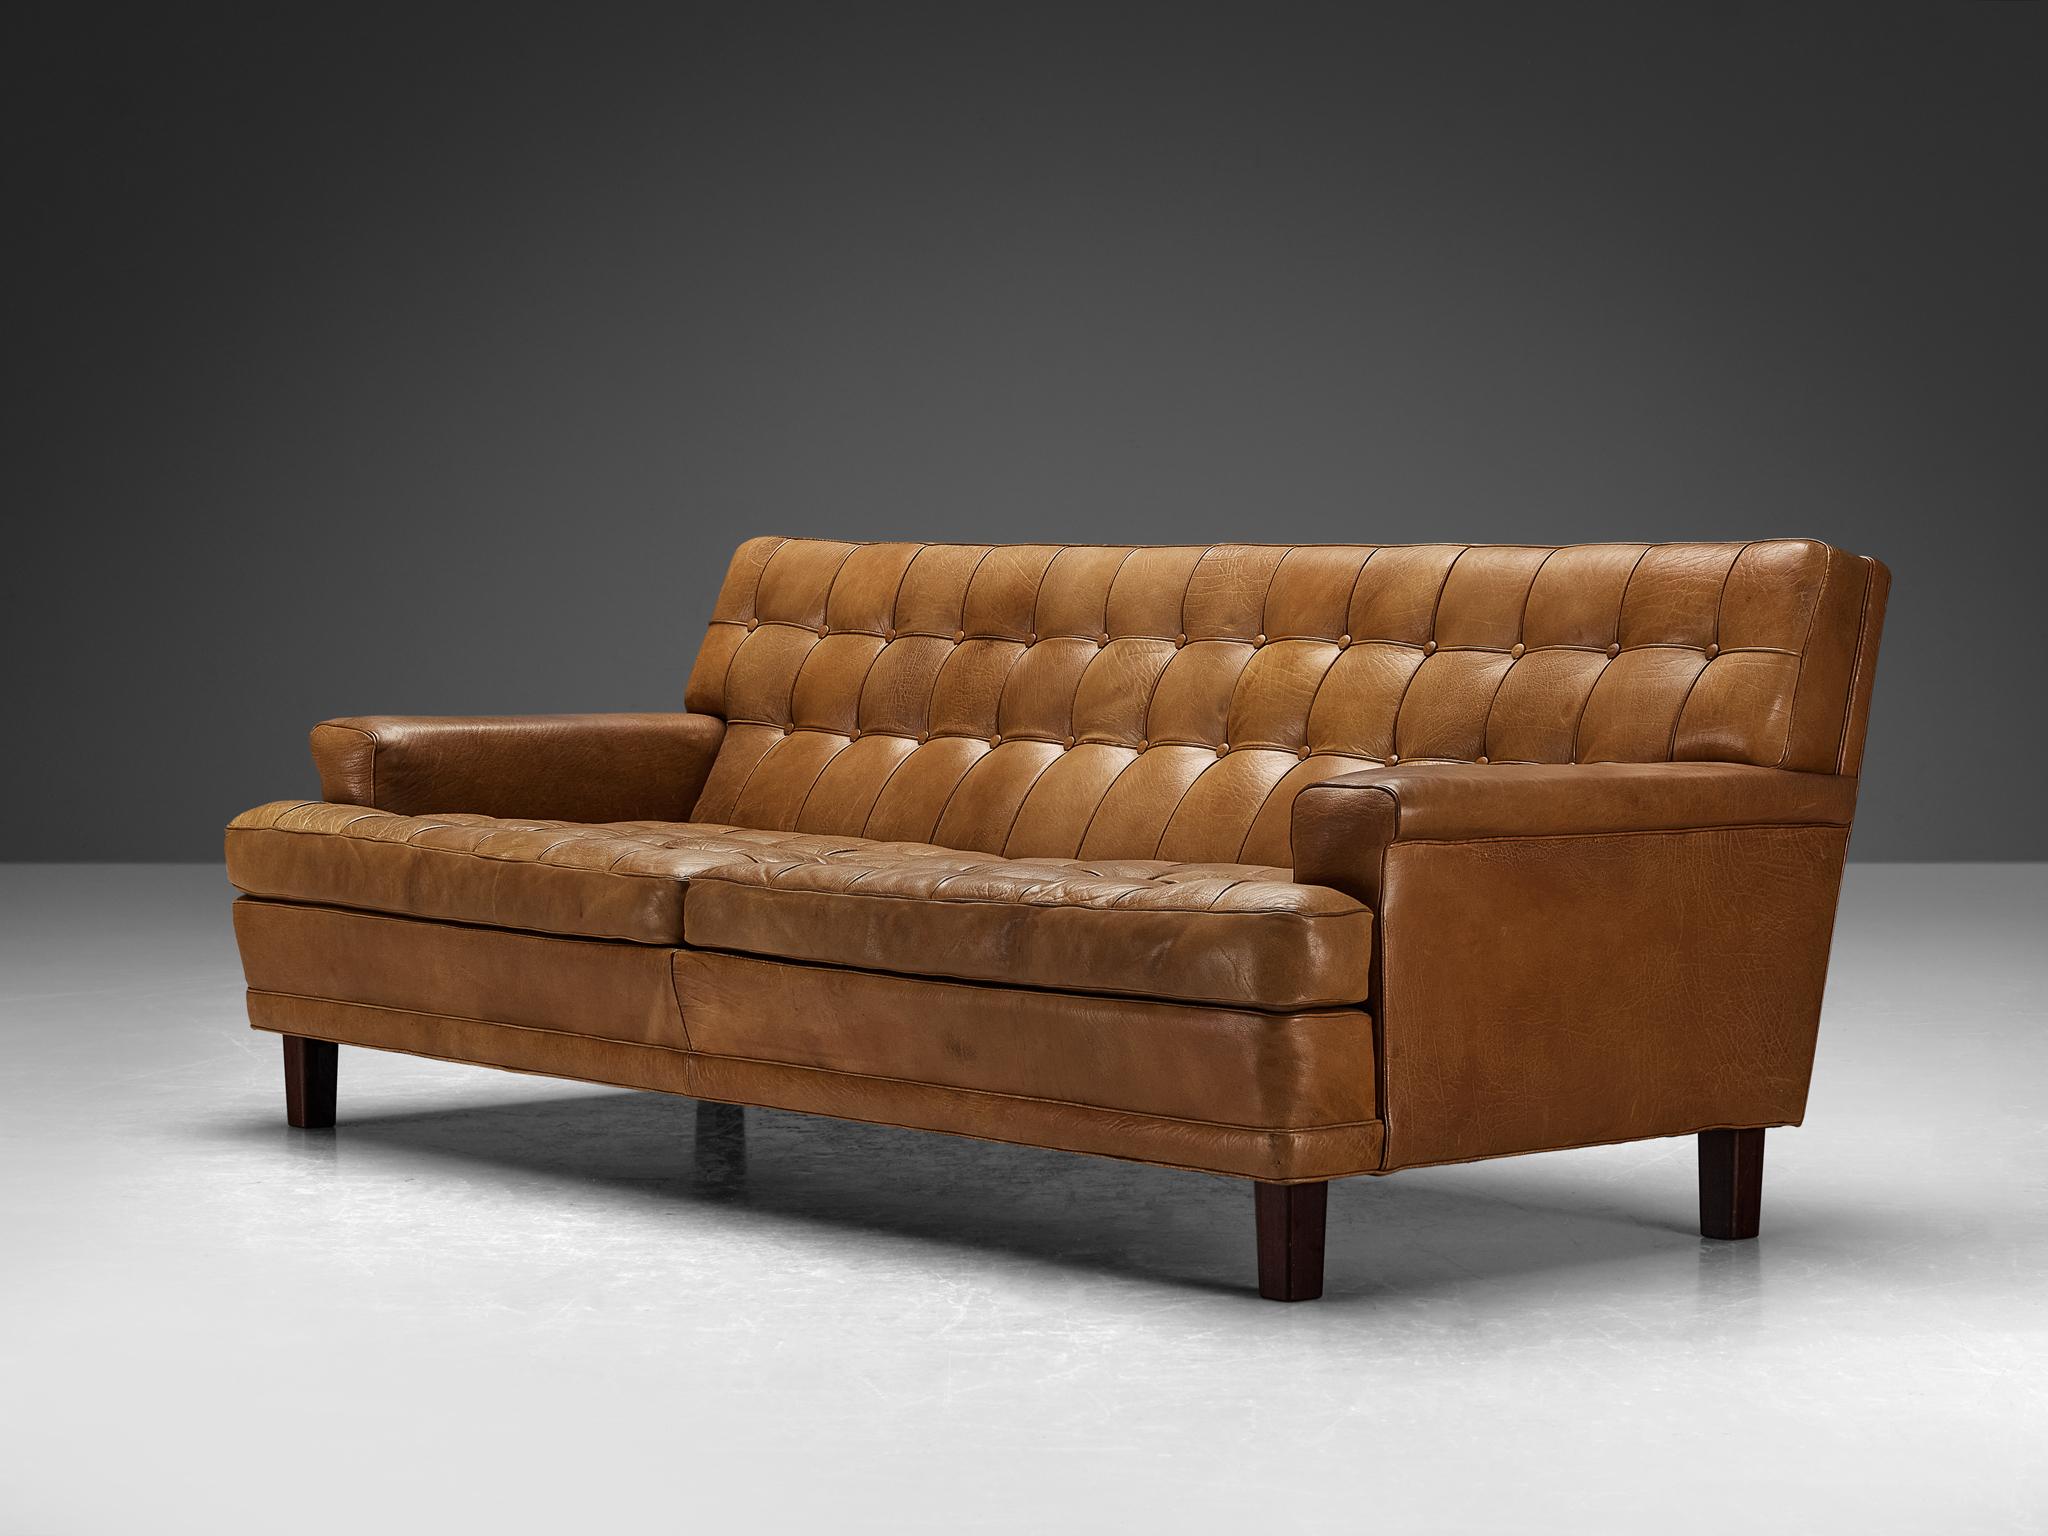 Mid-20th Century Arne Norell 'Merkur' Sofa in Cognac Leather  For Sale